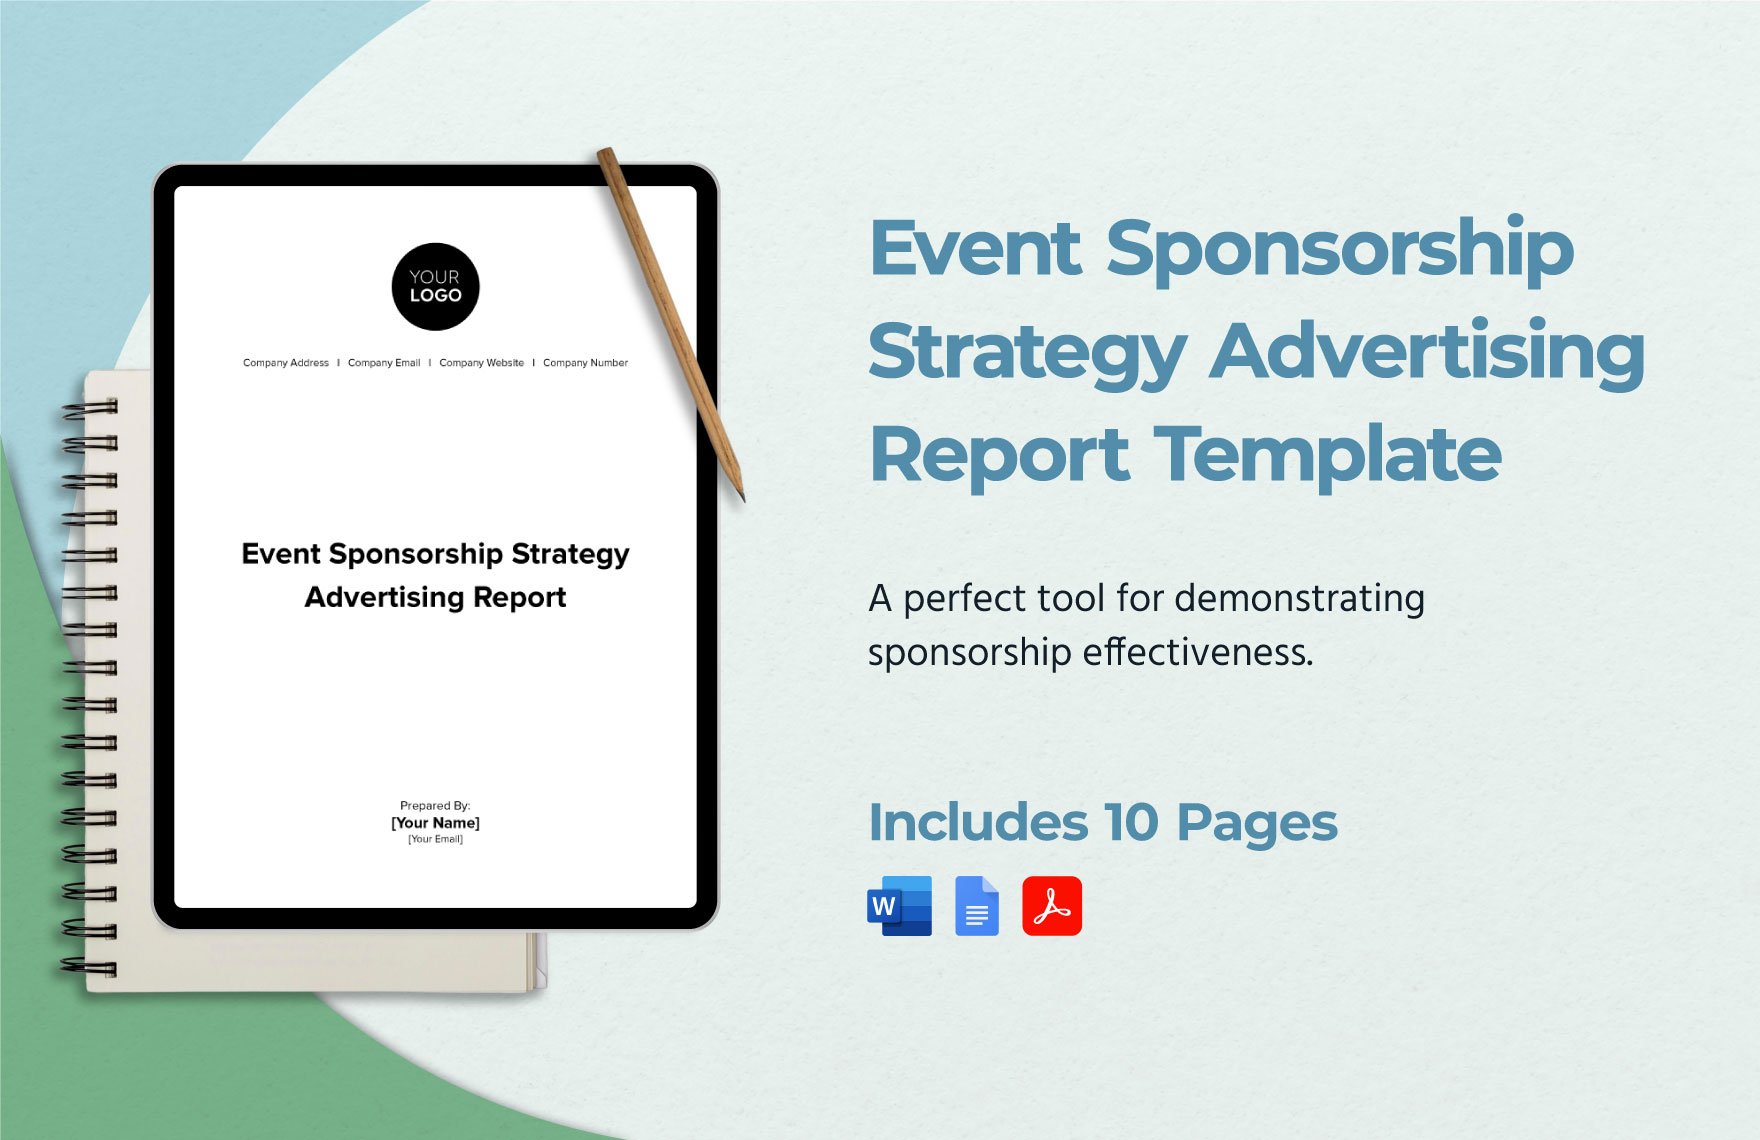 Event Sponsorship Strategy Advertising Report Template in Word, Google Docs, PDF